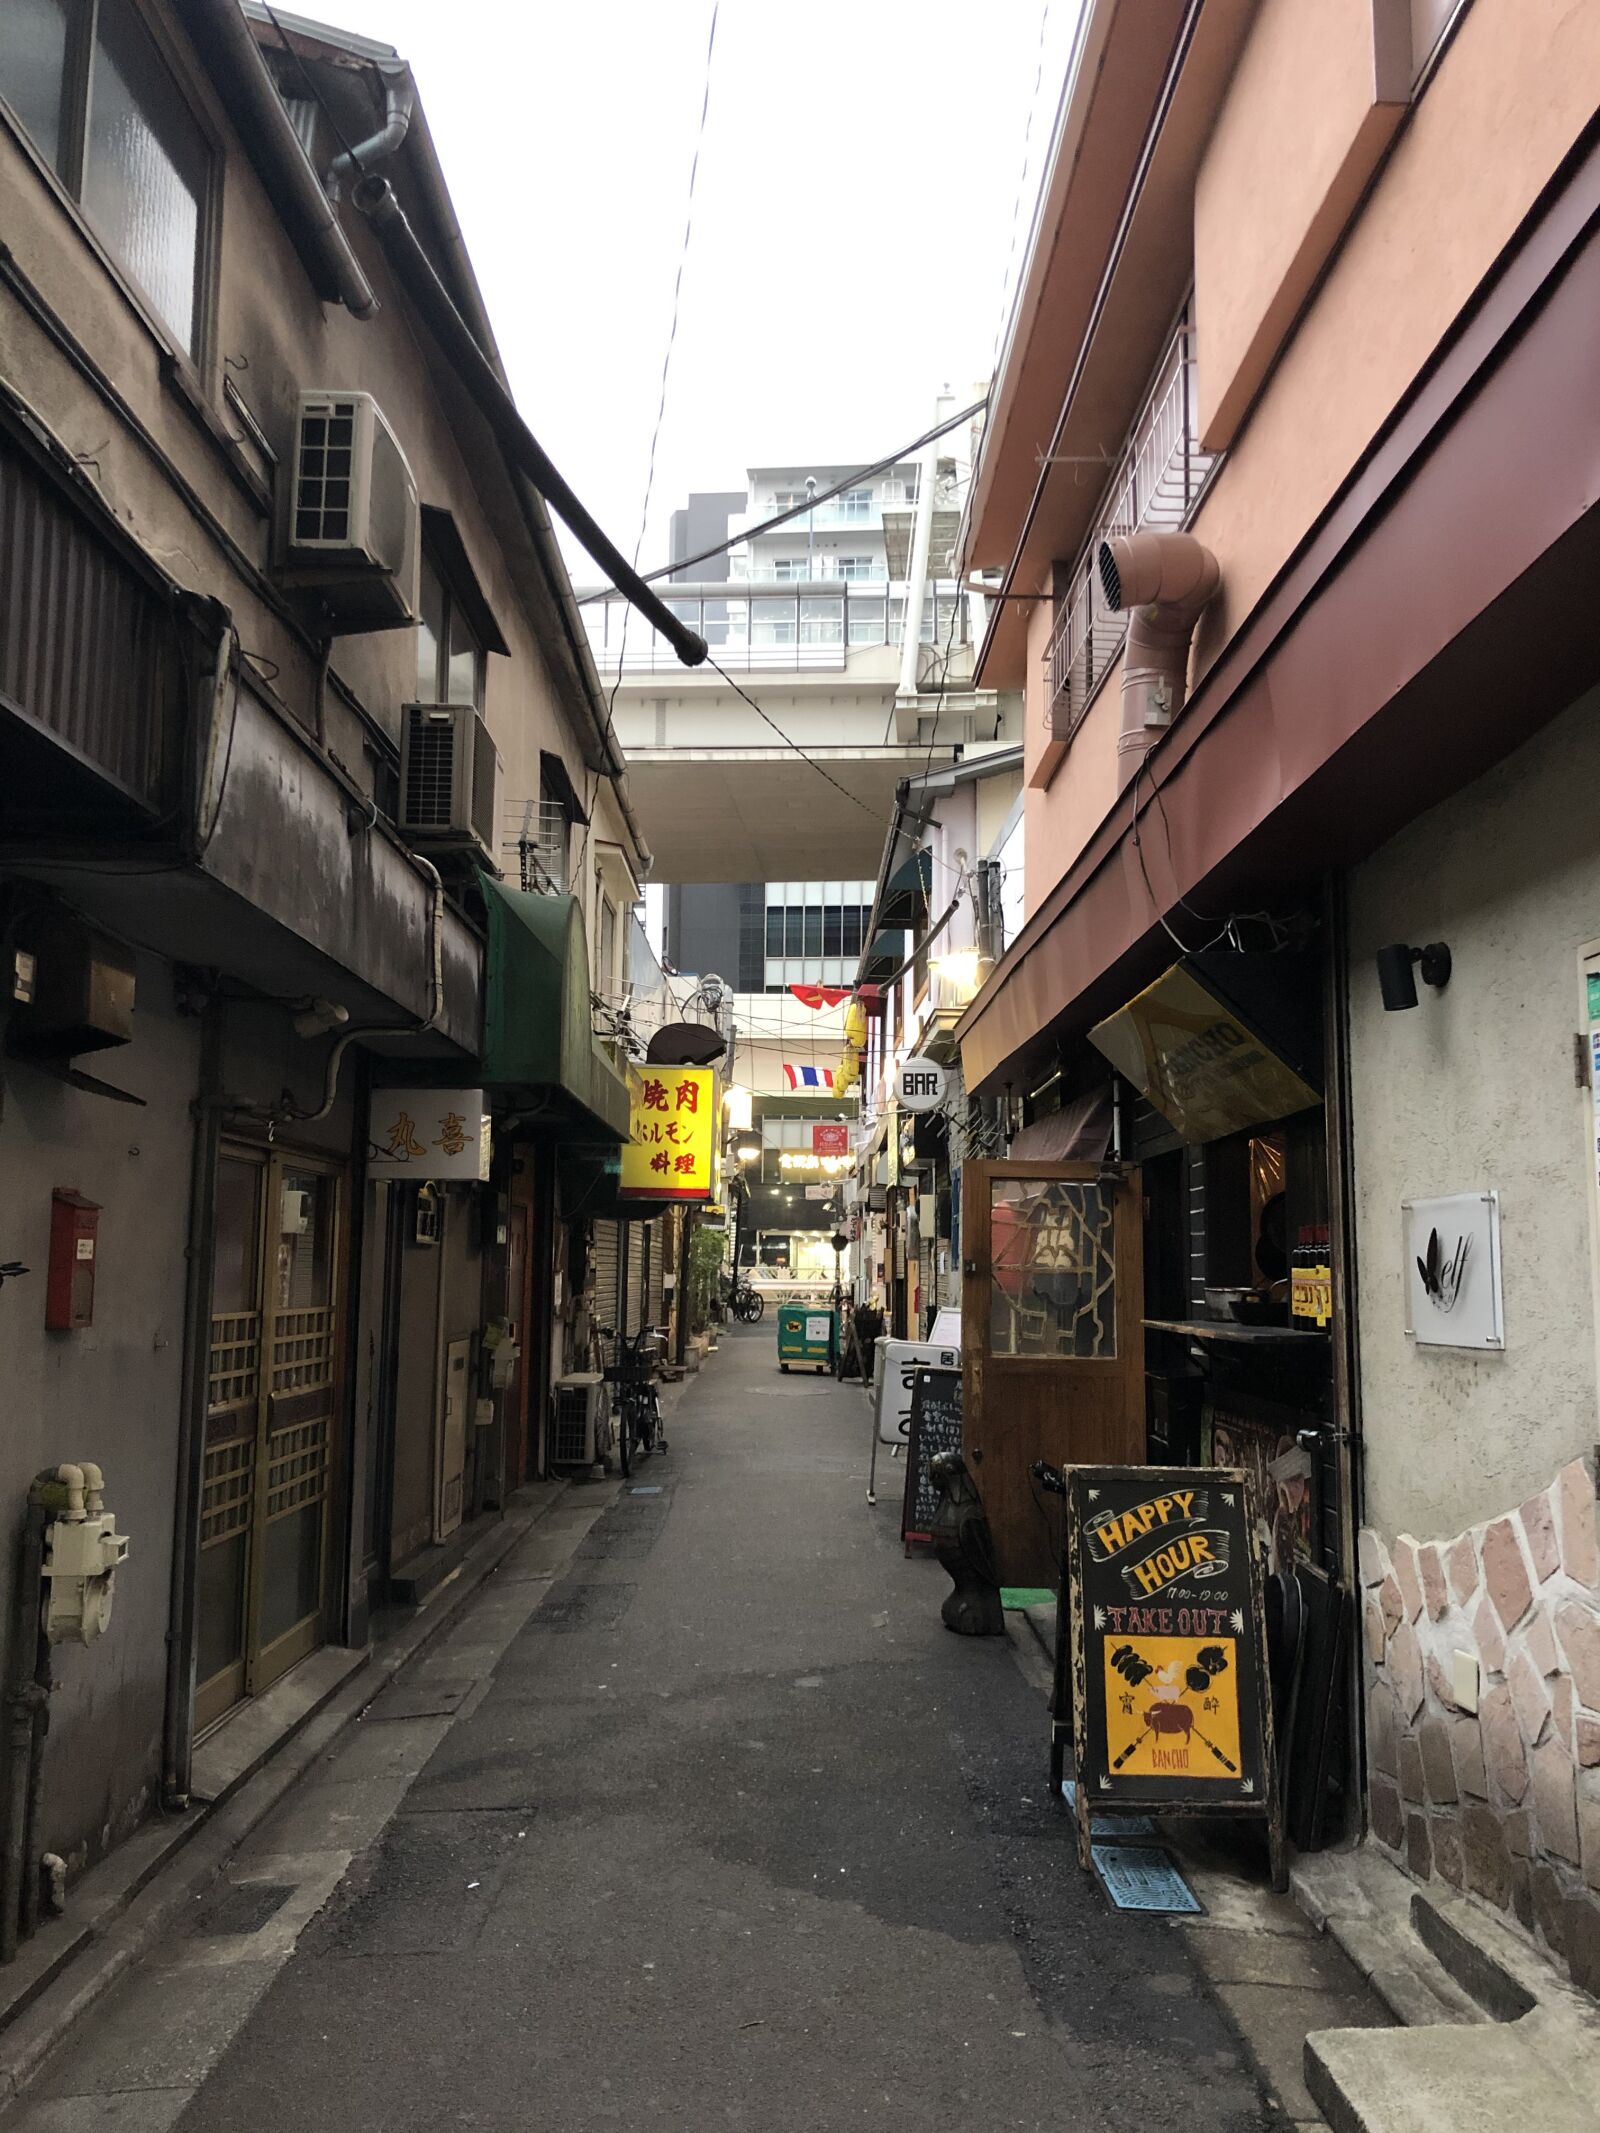 Apple iPhone X + iPhone X back dual camera 4mm f/1.8 sample photo. Japan, alley, skyline photography